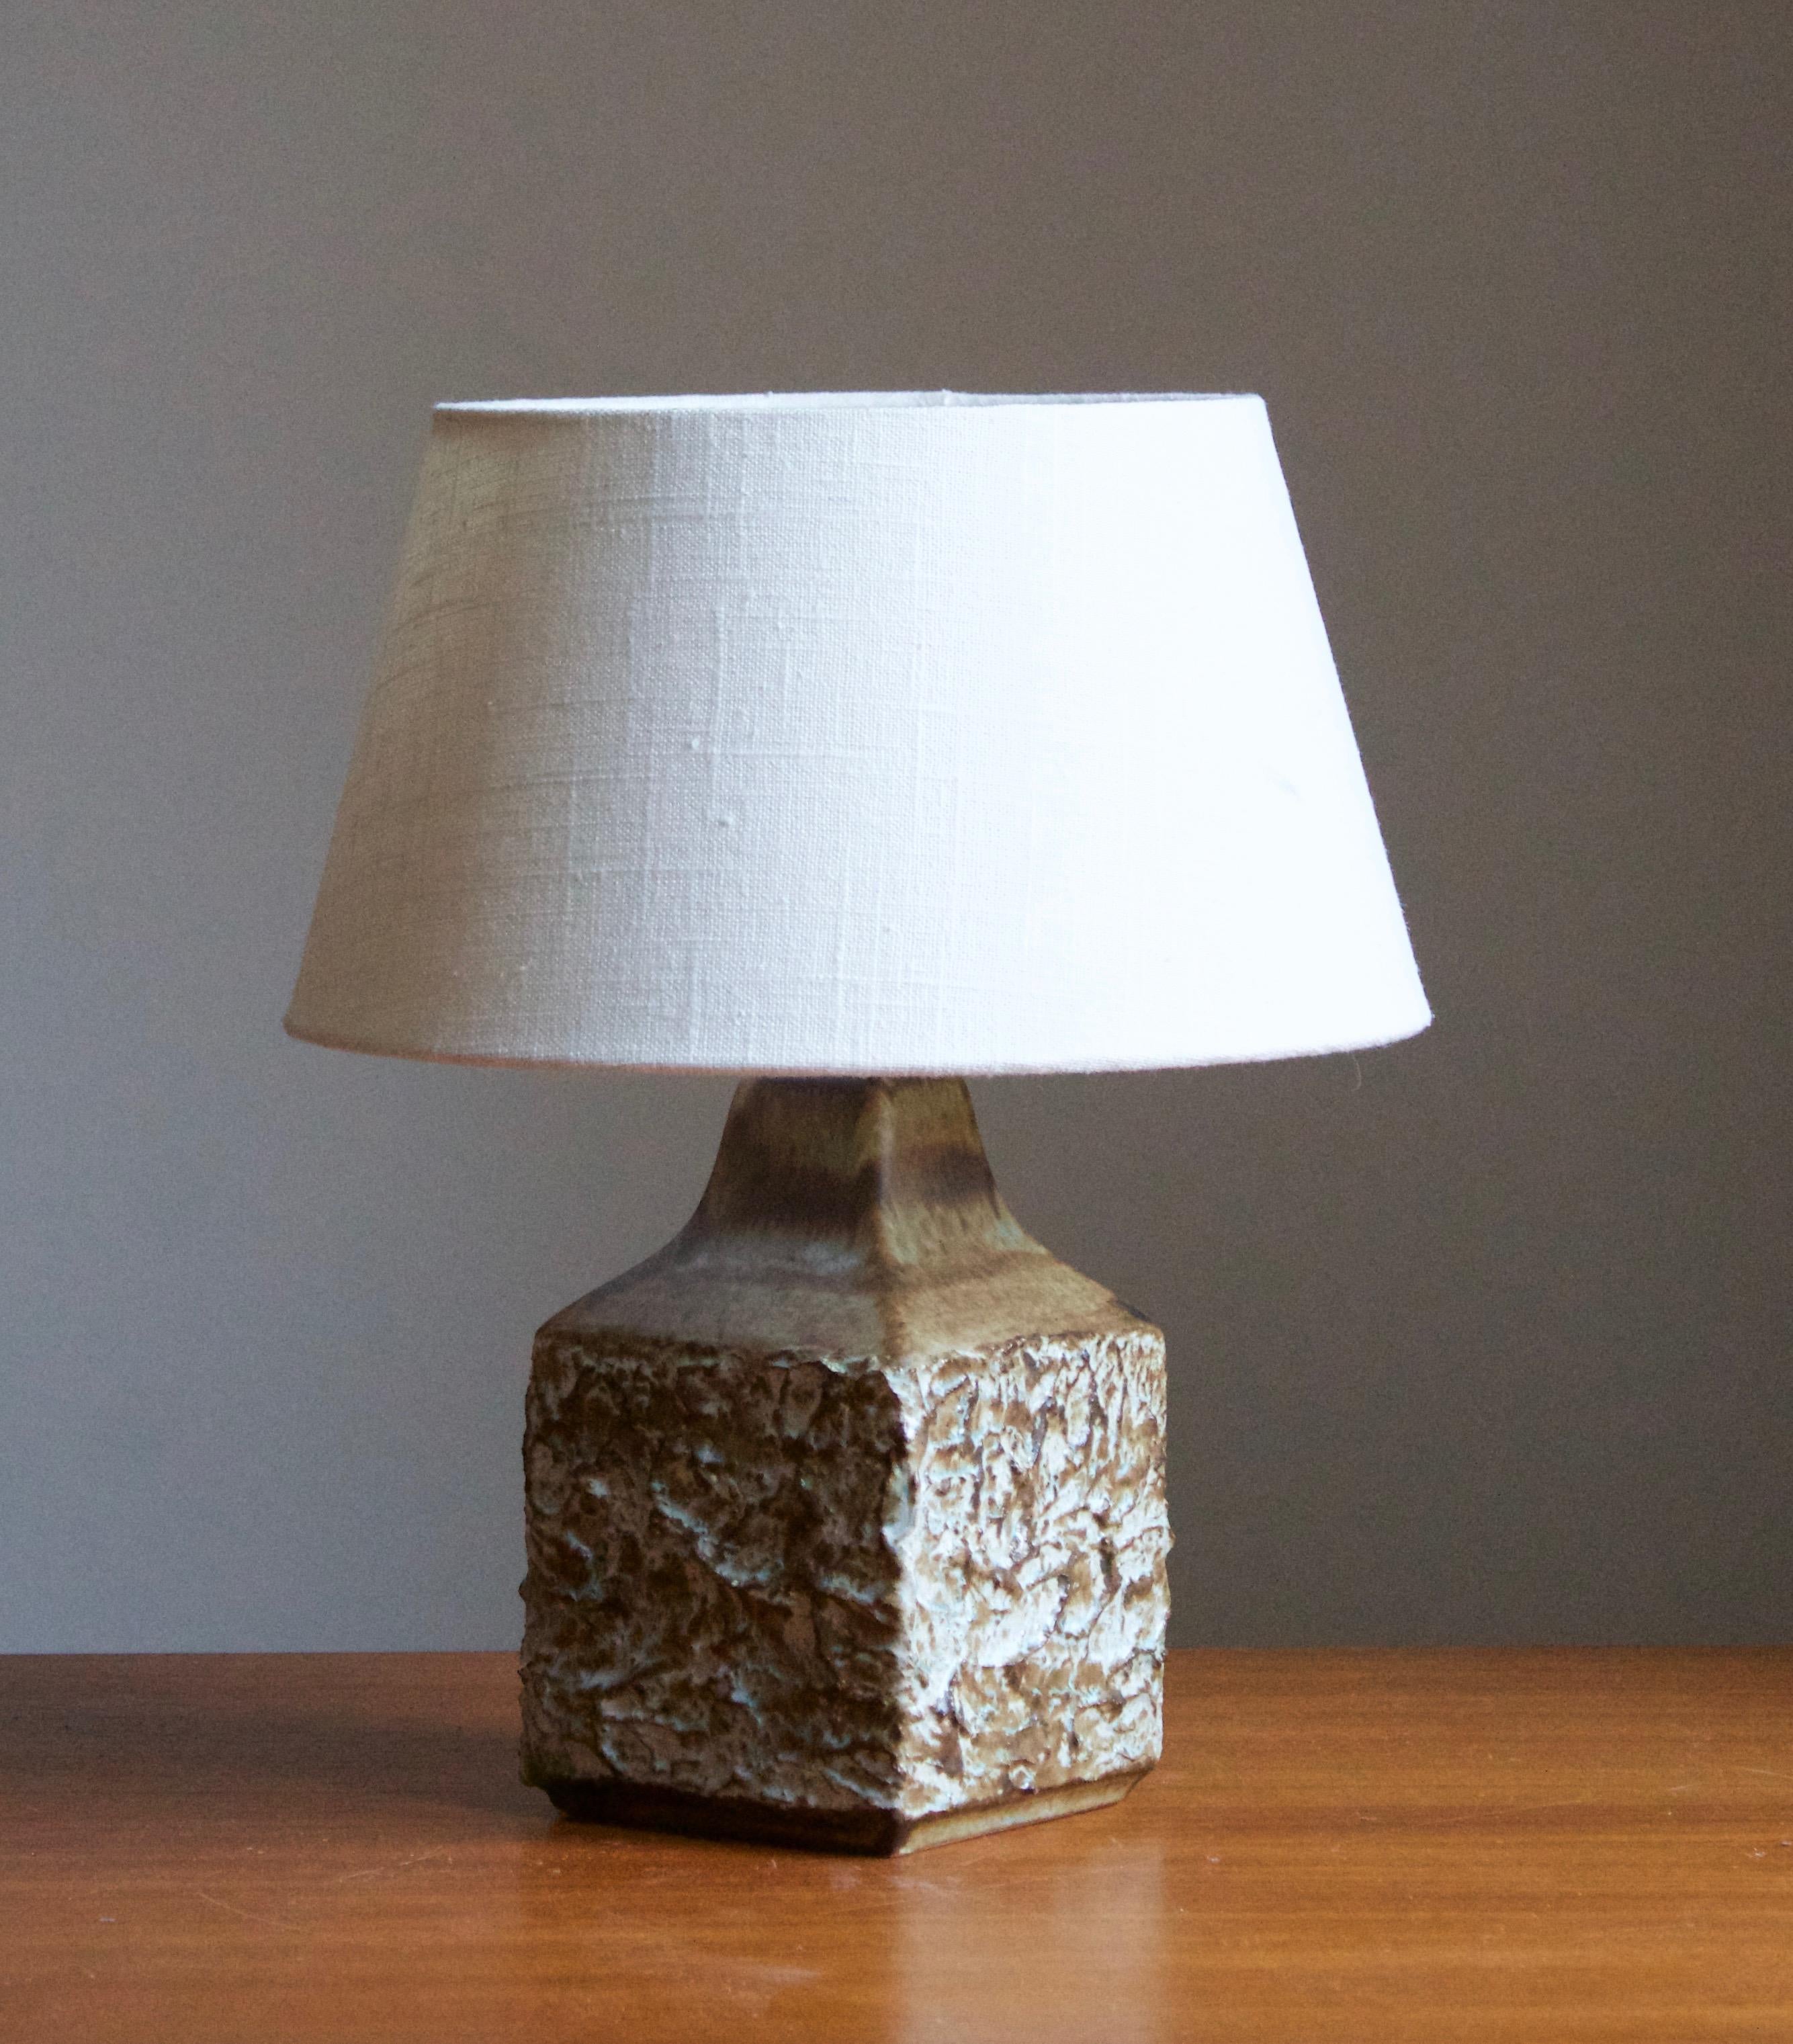 A stoneware table lamp. Produced by Ego Stengods c. 1960s-1970s. Stamped.

Stated dimensions exclude lampshade. Height including socket. Sold without lampshade.

Glaze features a brown color.

Other ceramicists of the period include Axel Salto, Arne